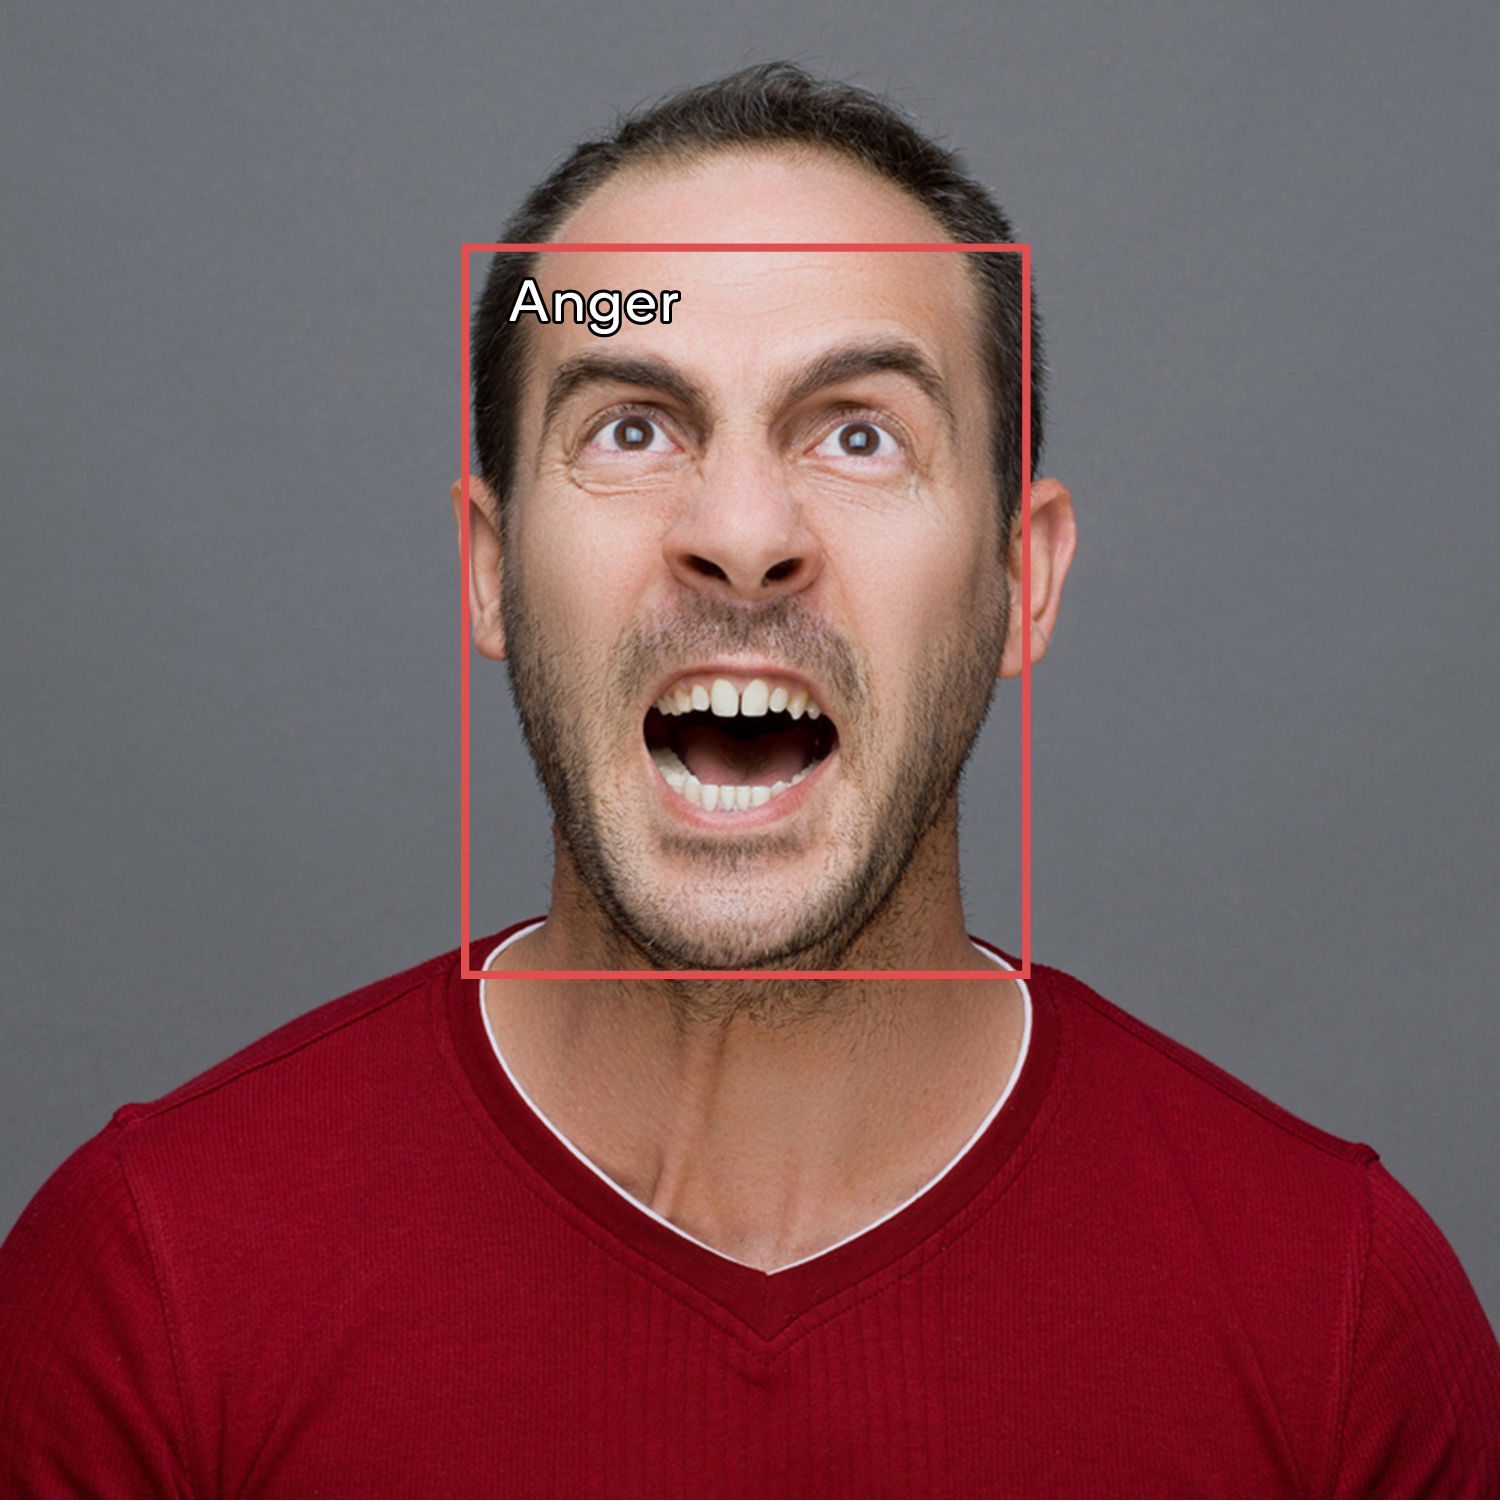 Facial Expression Detection - Anger